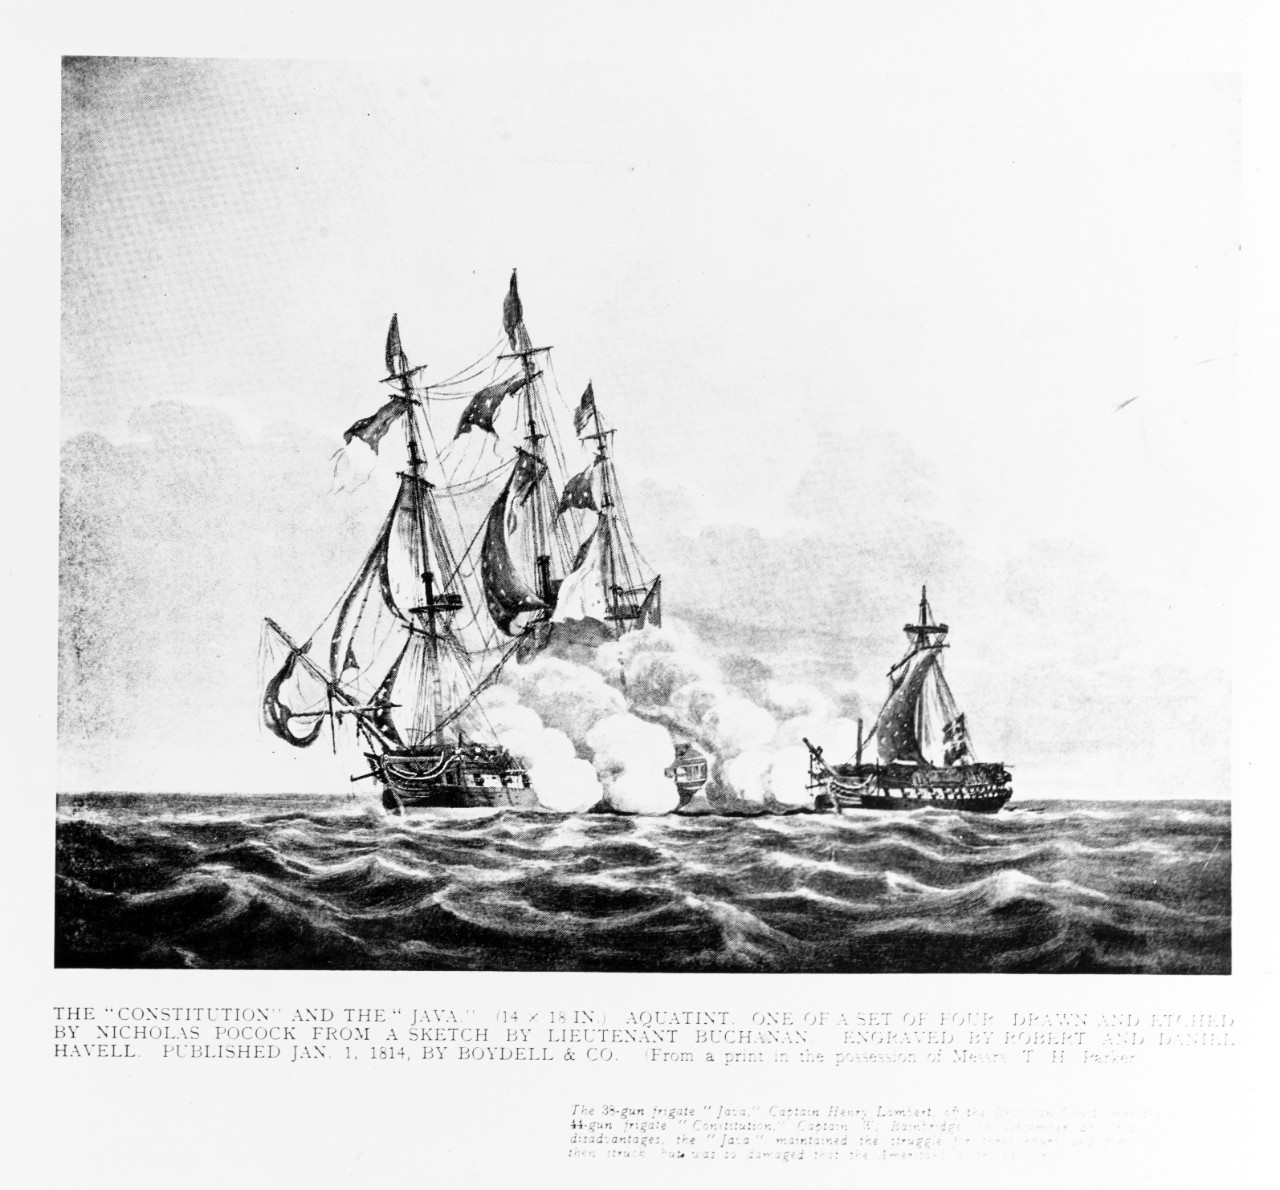 Battle between USS CONSTITUTION and HMS JAVA